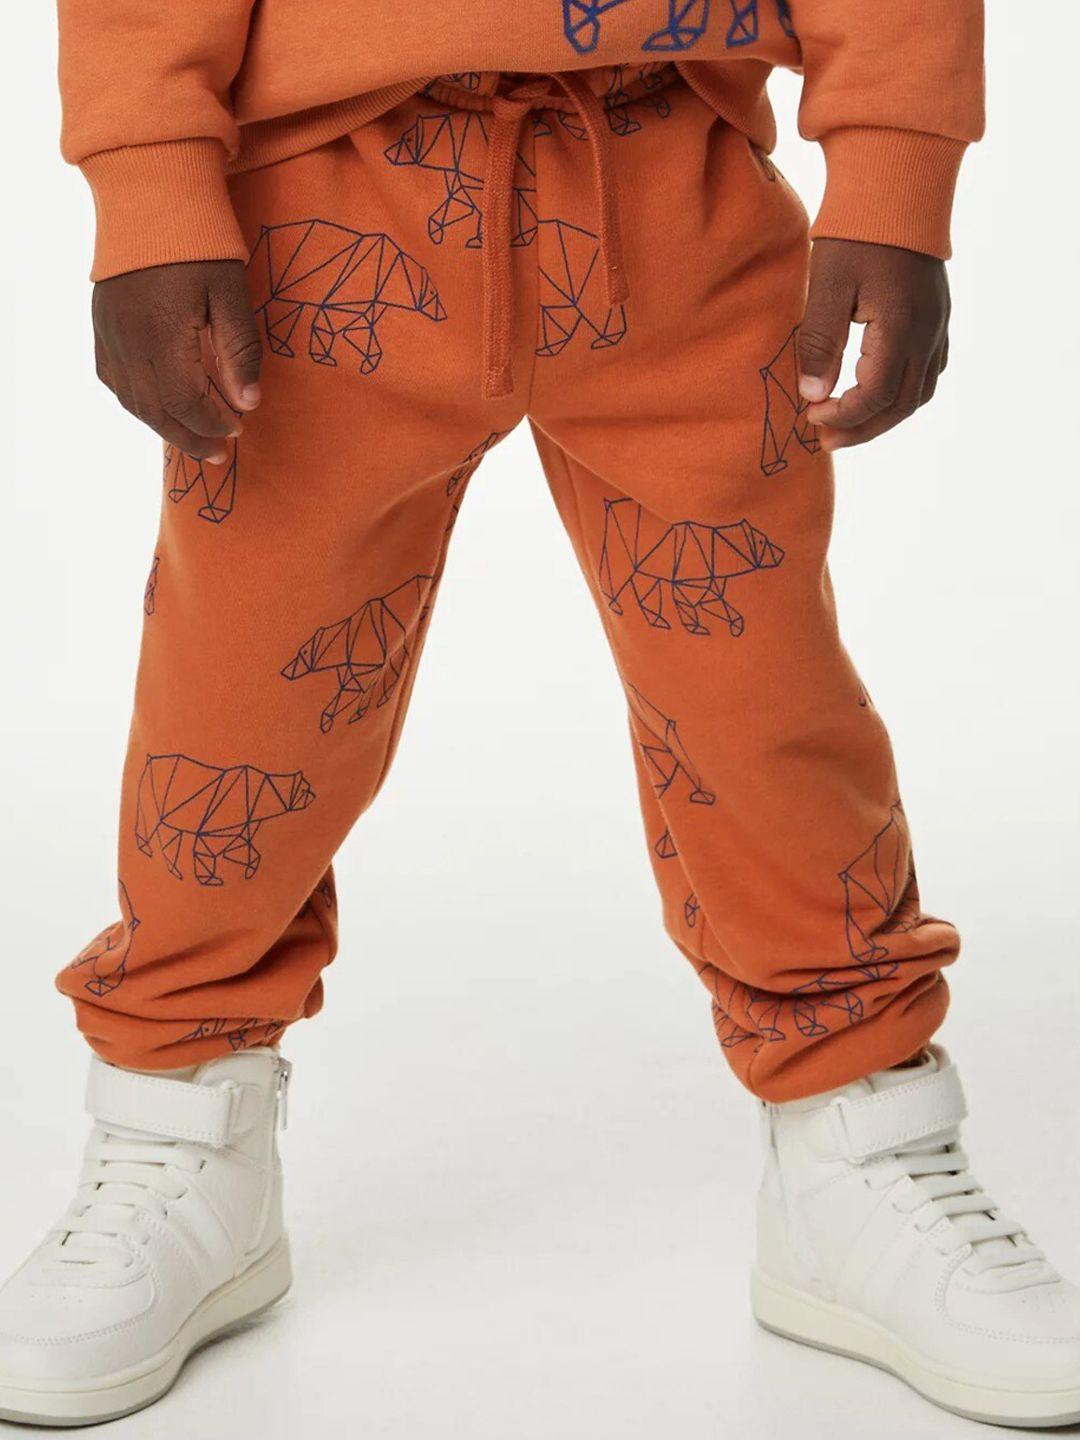 marks & spencer boys graphic printed joggers